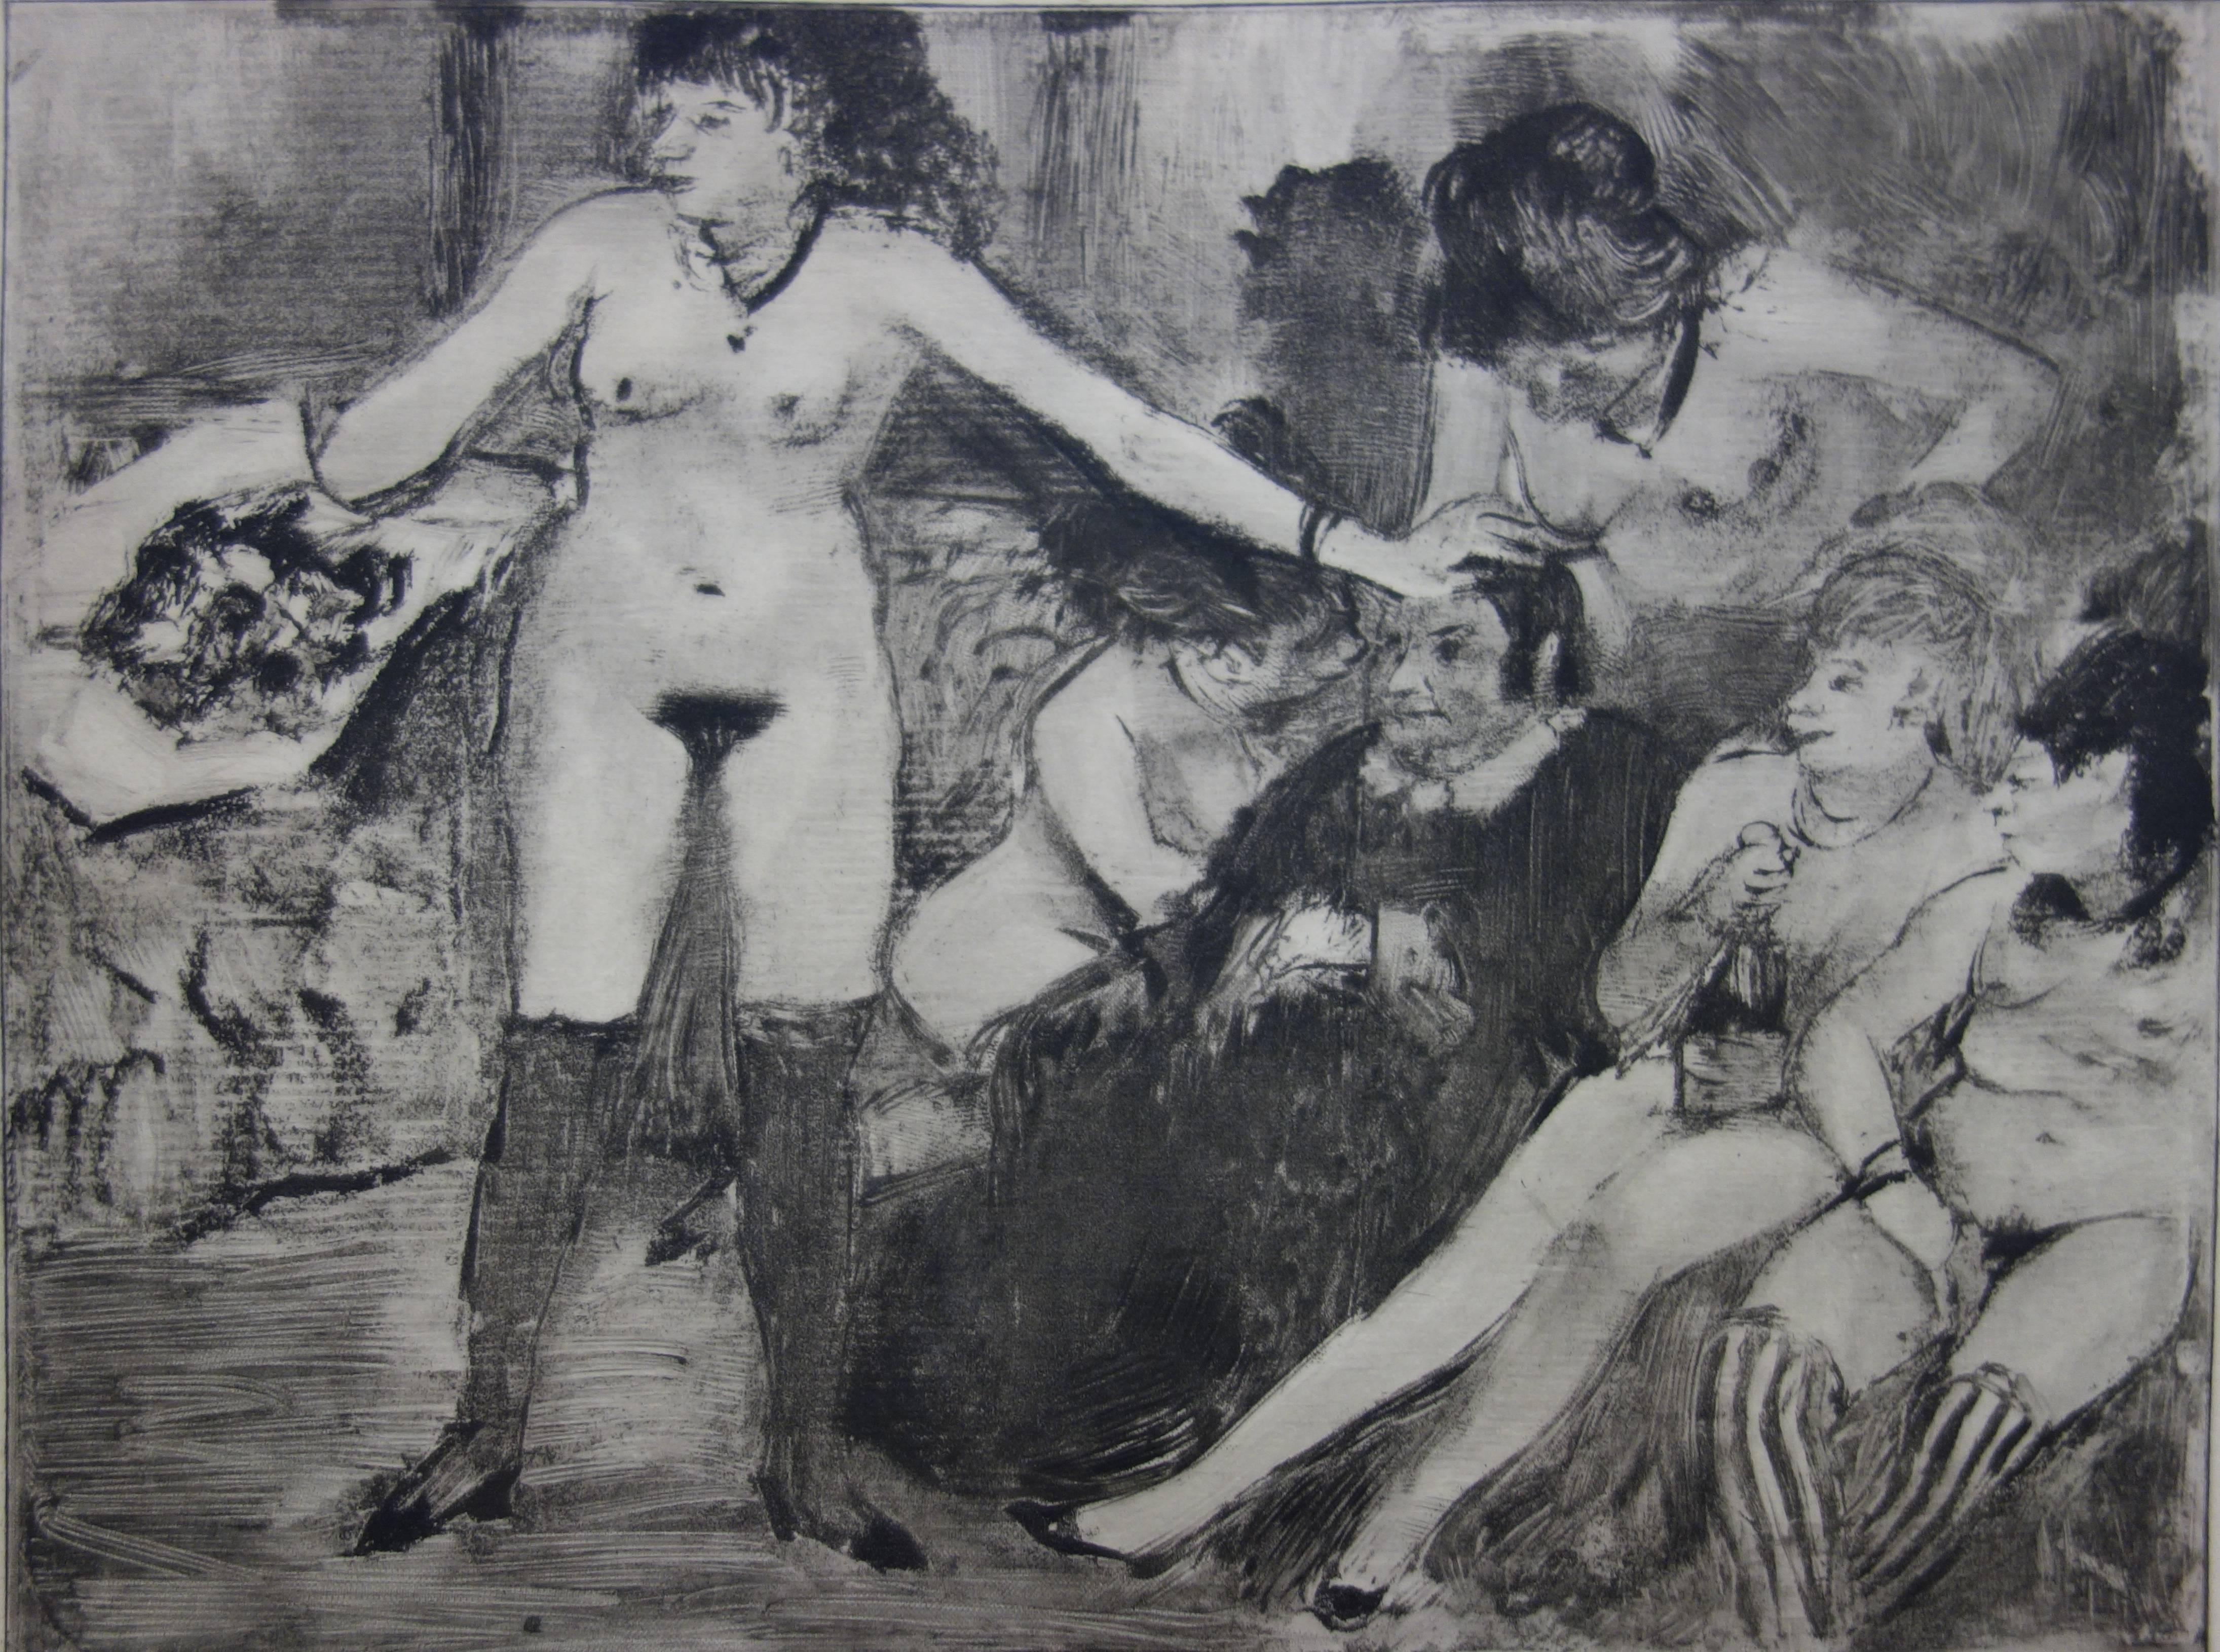 Whorehouse Scene : Celebration for Madam Mother - etching - Modern Print by (after) Edgar Degas